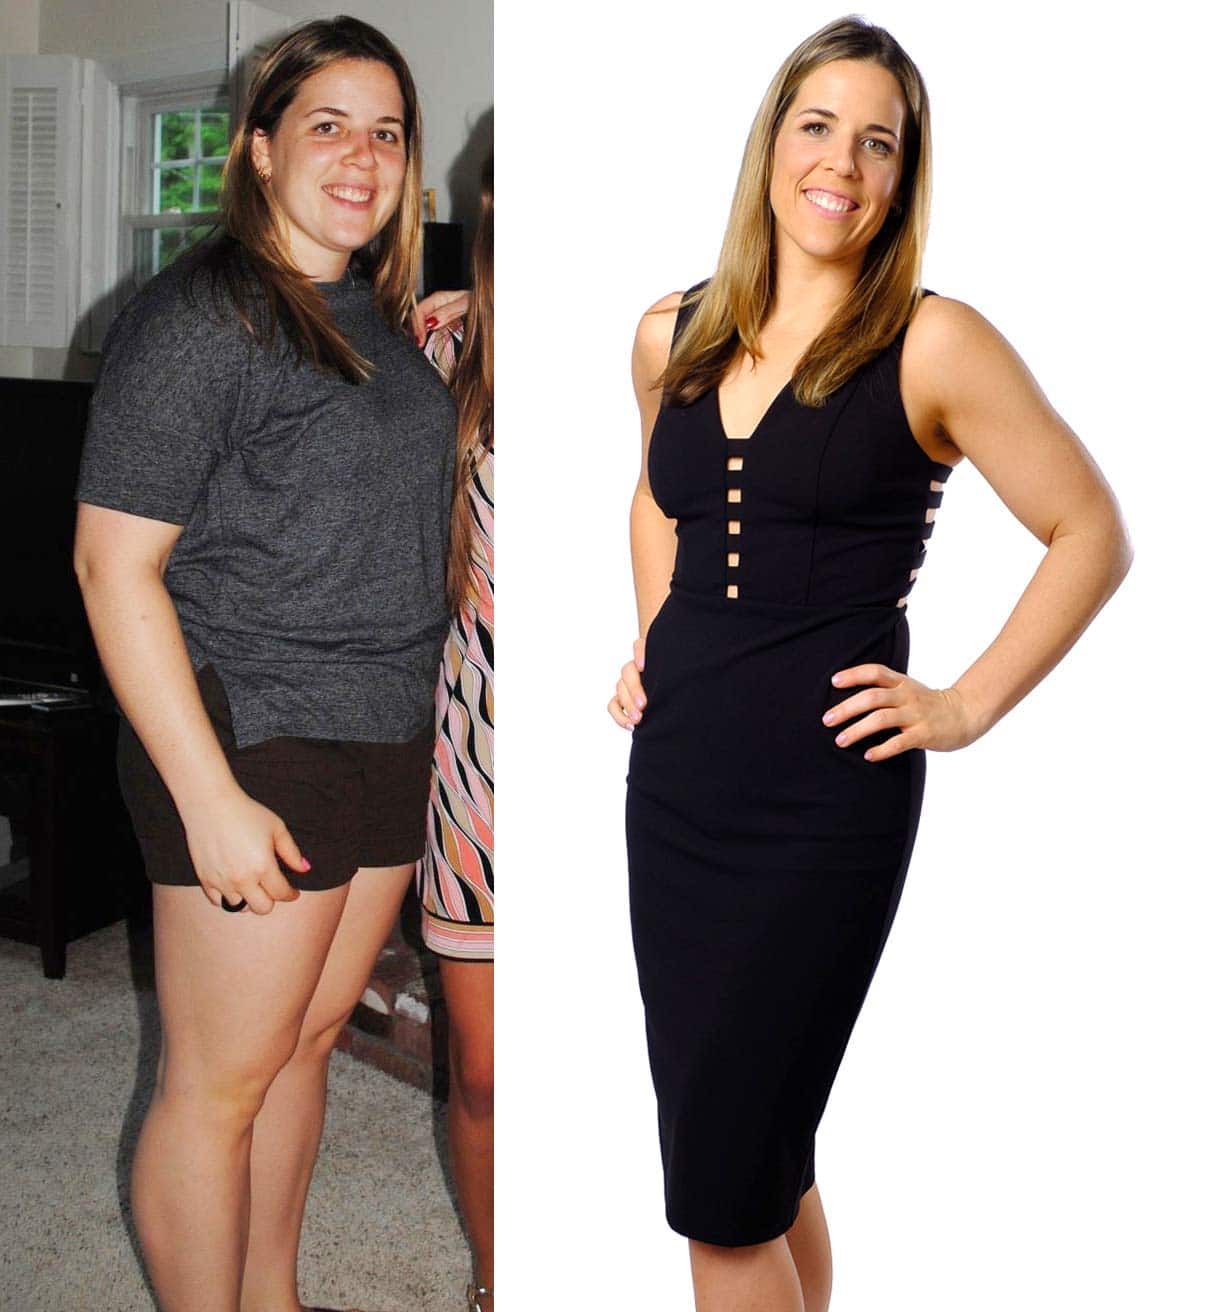 50 pound weight loss before and after Michelle DAmico